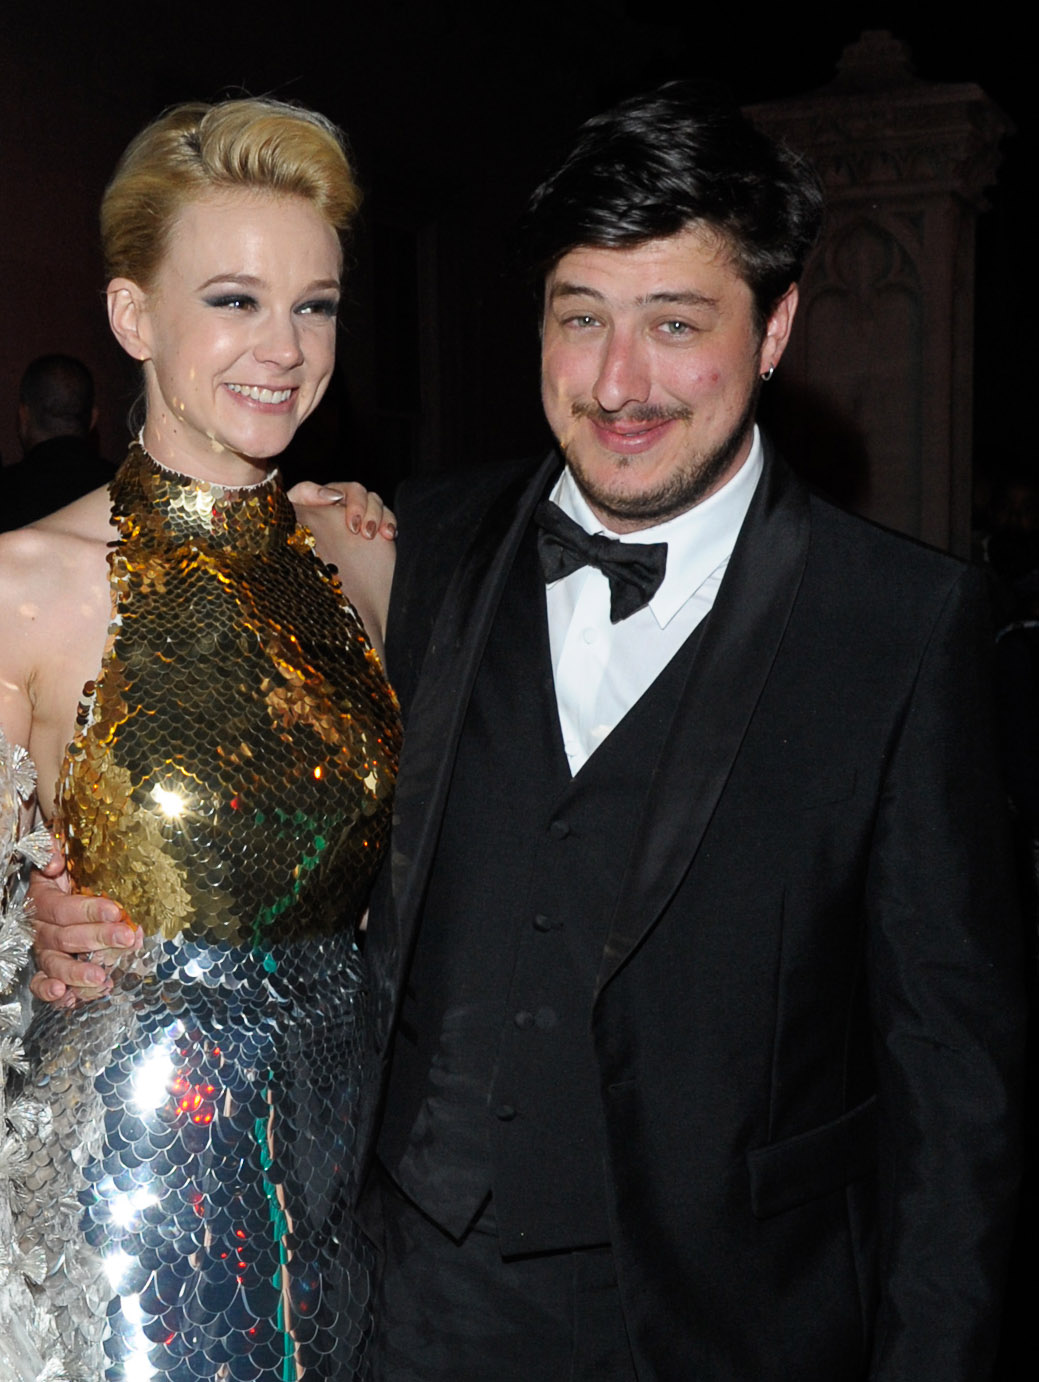 Carey Mulligan and Marcus Mumford attend the after party for the "Schiaparelli and Prada: Impossible Conversations" Costume Institute exhibition on May 7, 2012, in New York City | Source: Getty Images